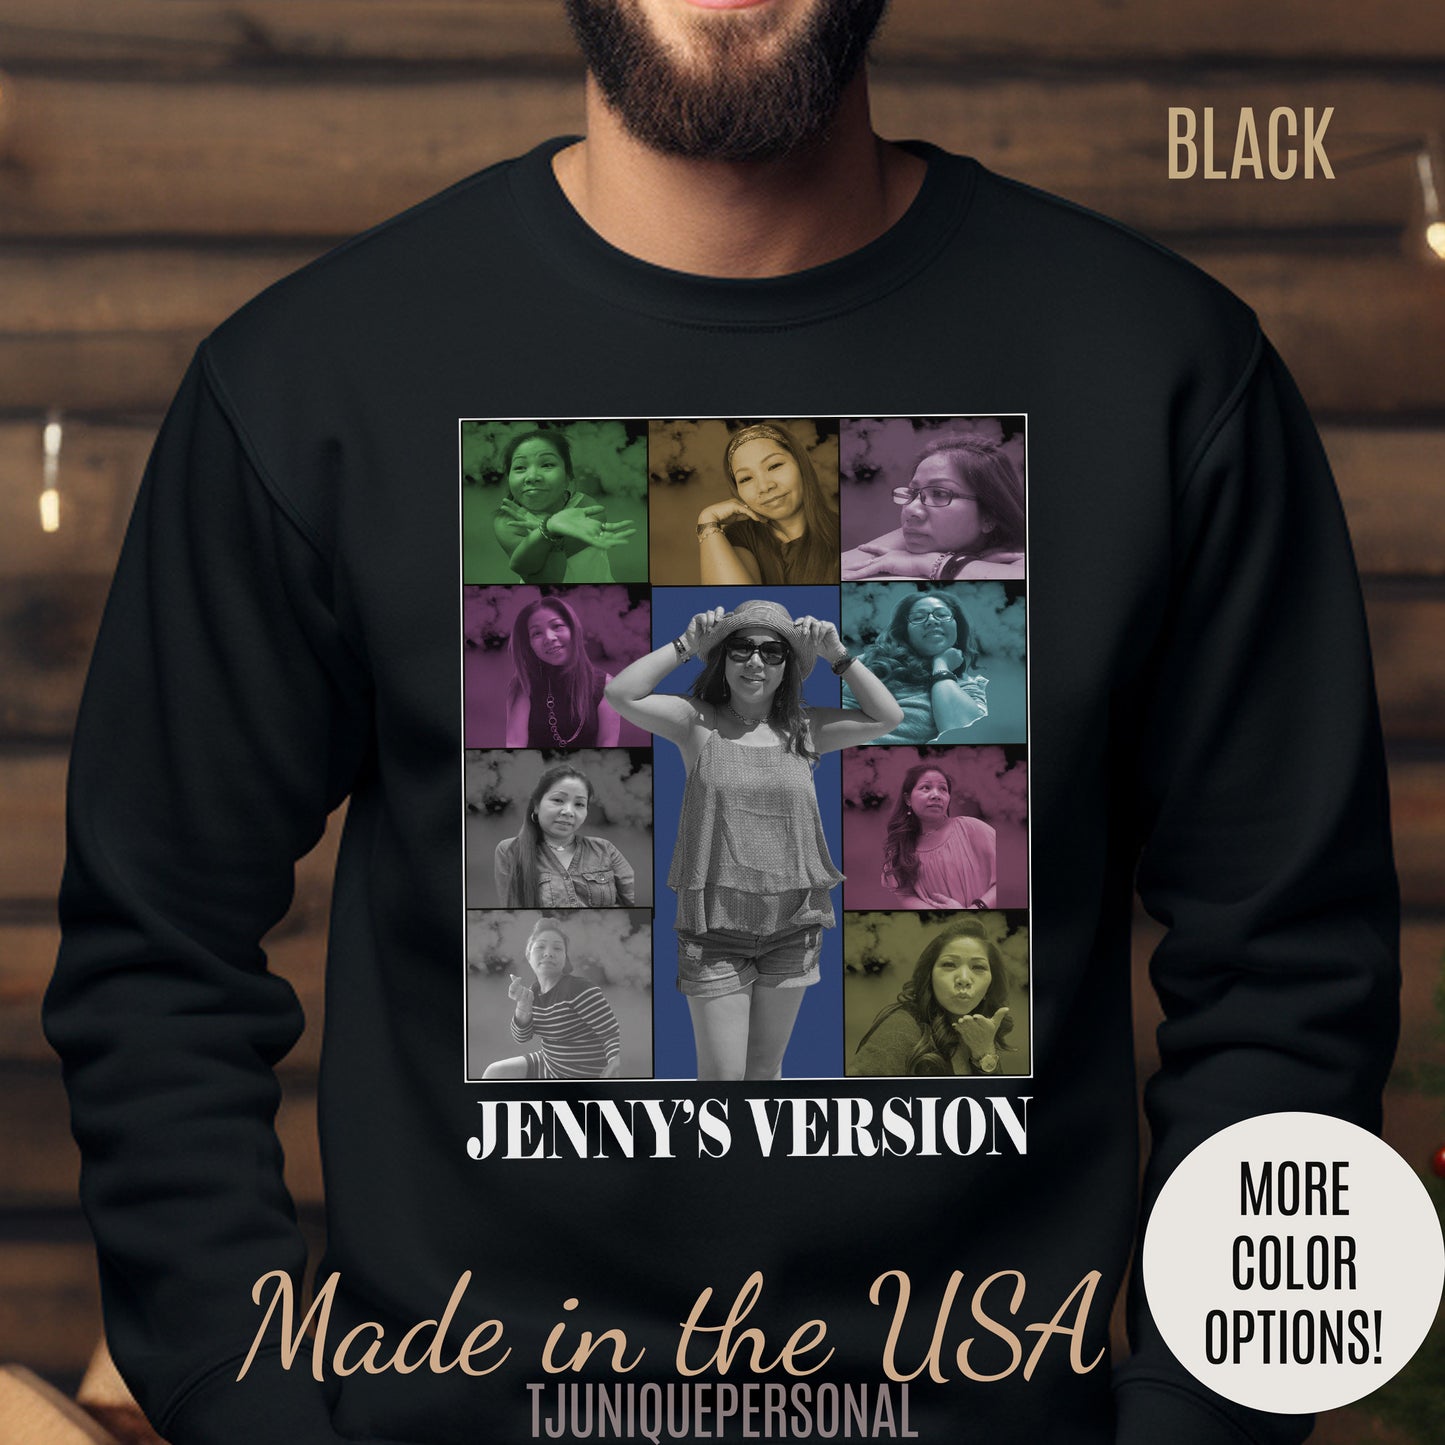 Custom Eras Tour Sweatshirt Personalized Name and Photo 90s Vintage Graphic Y2K Bootleg Rap Tee Funny Boyfriend Valentines Day Gift, S1361